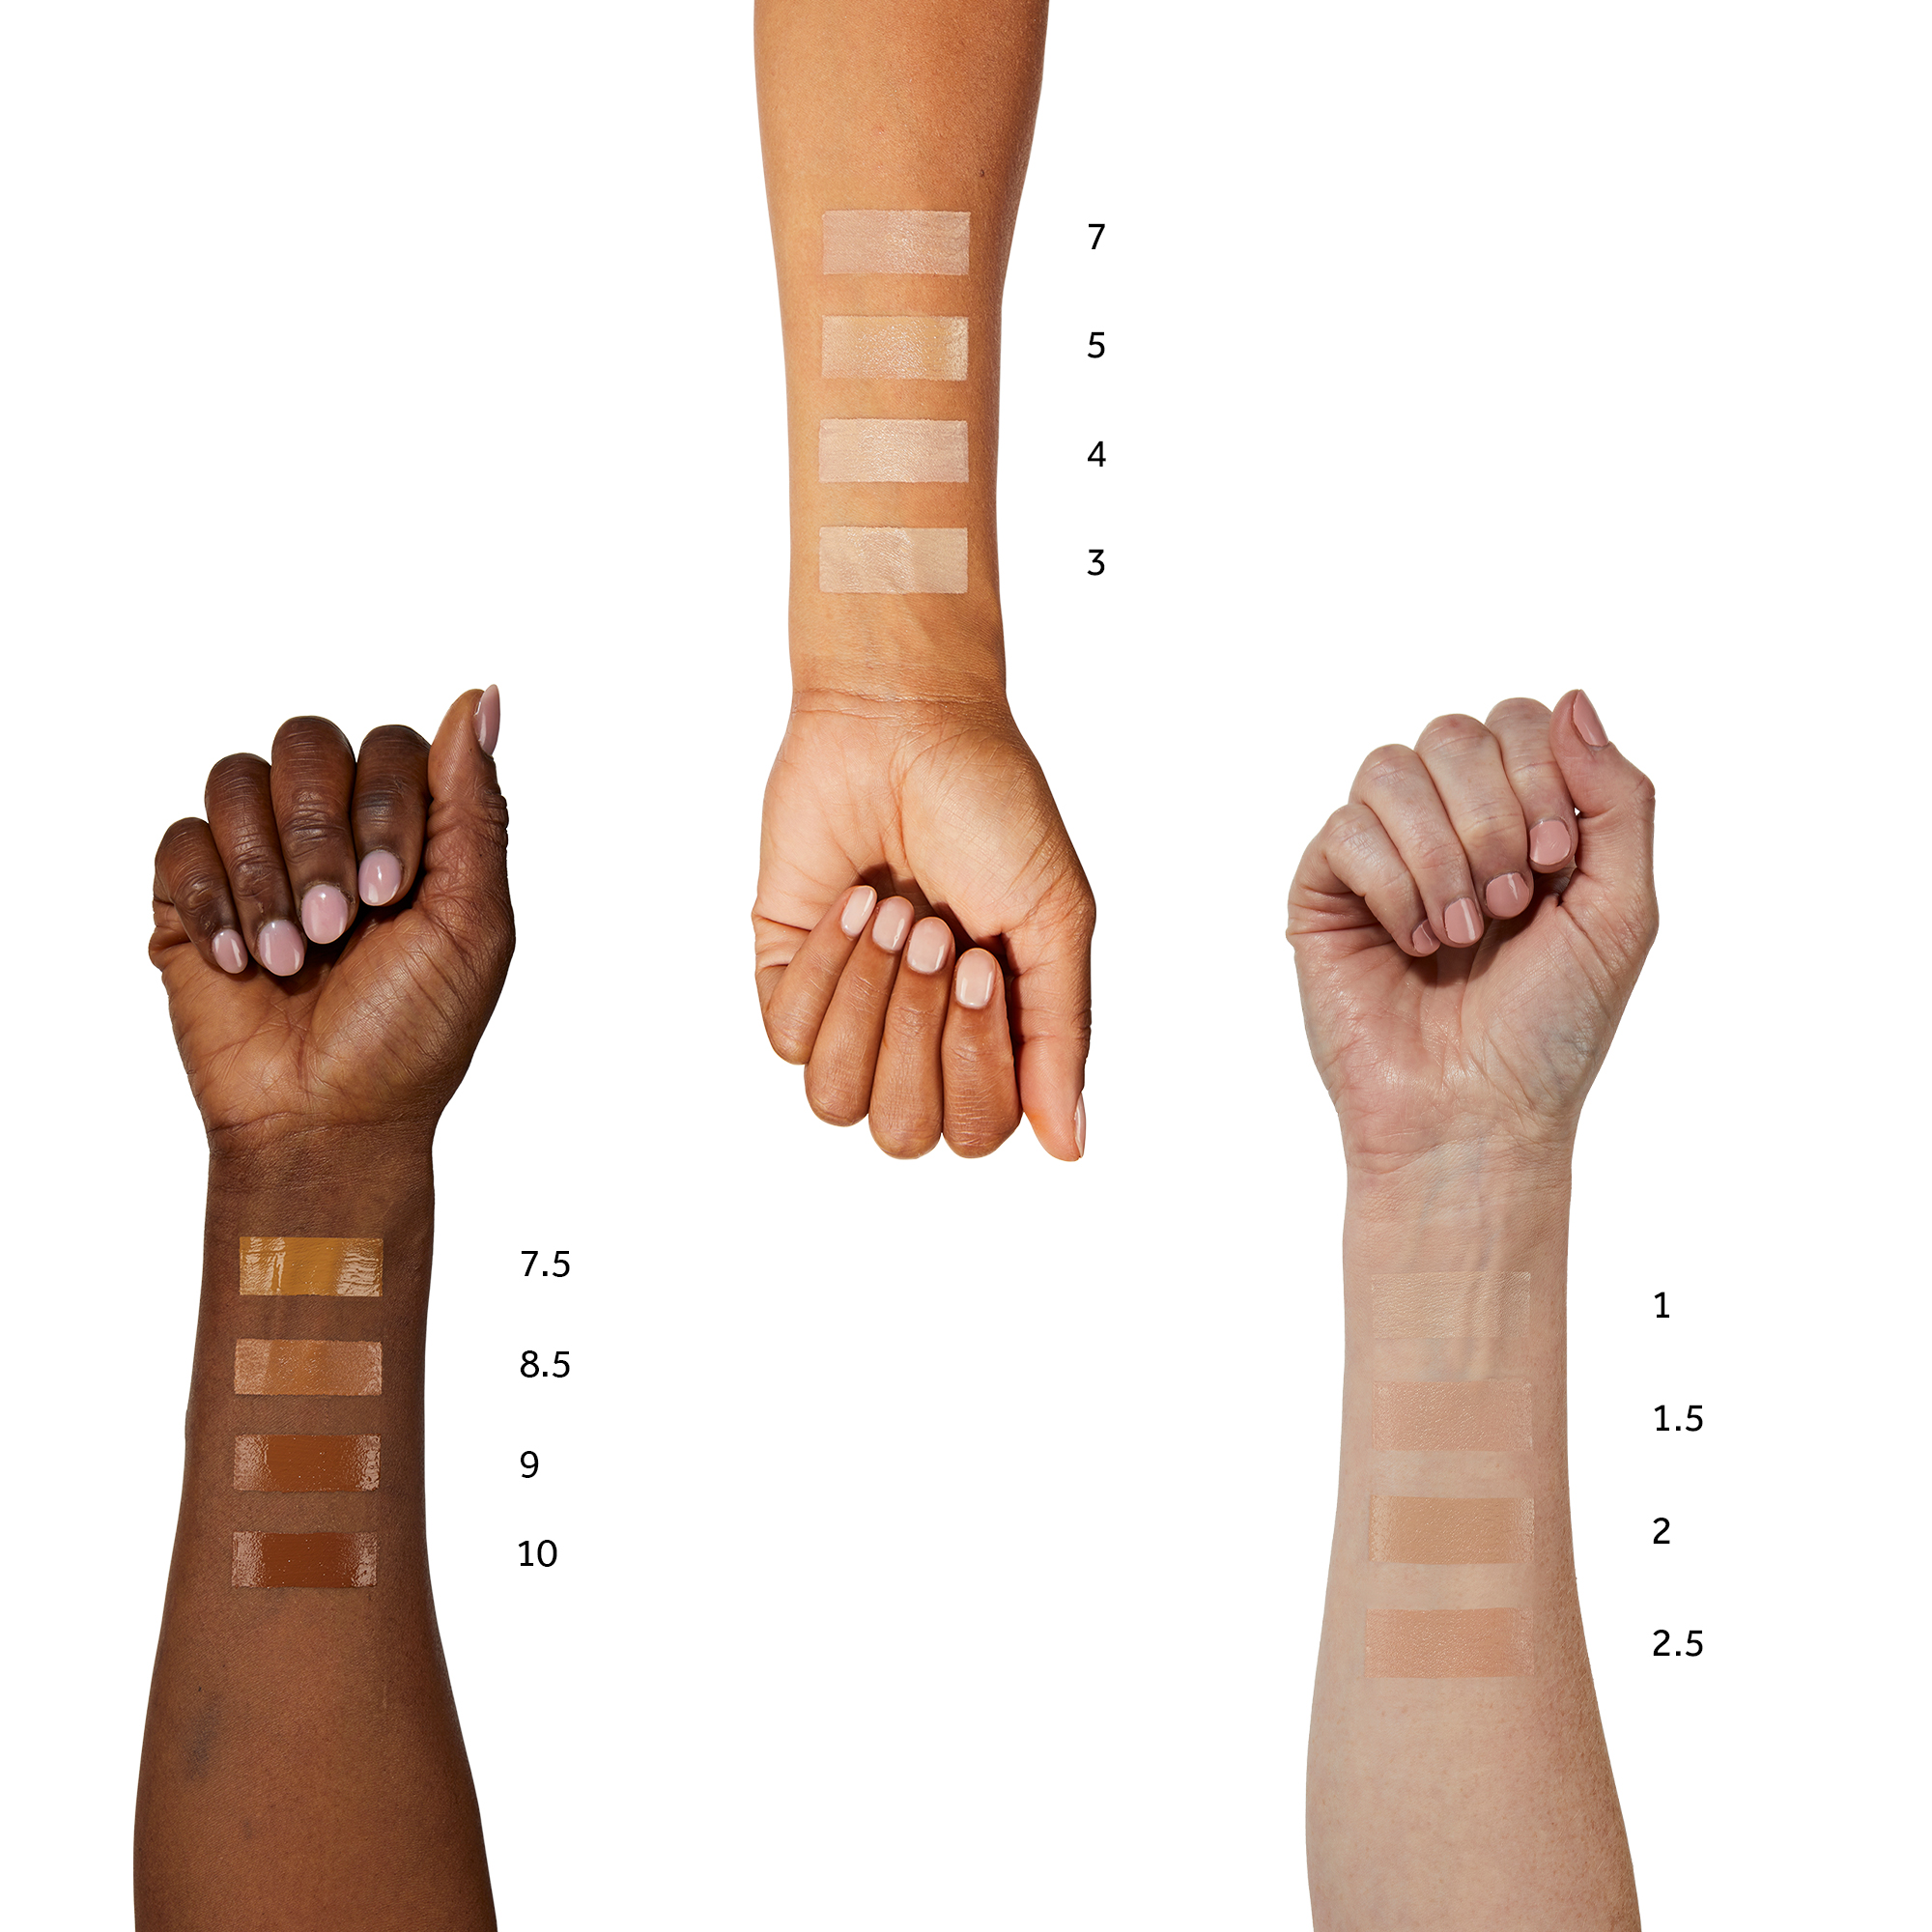 The image shows how the shades look on different skin types and the numbers show the shades